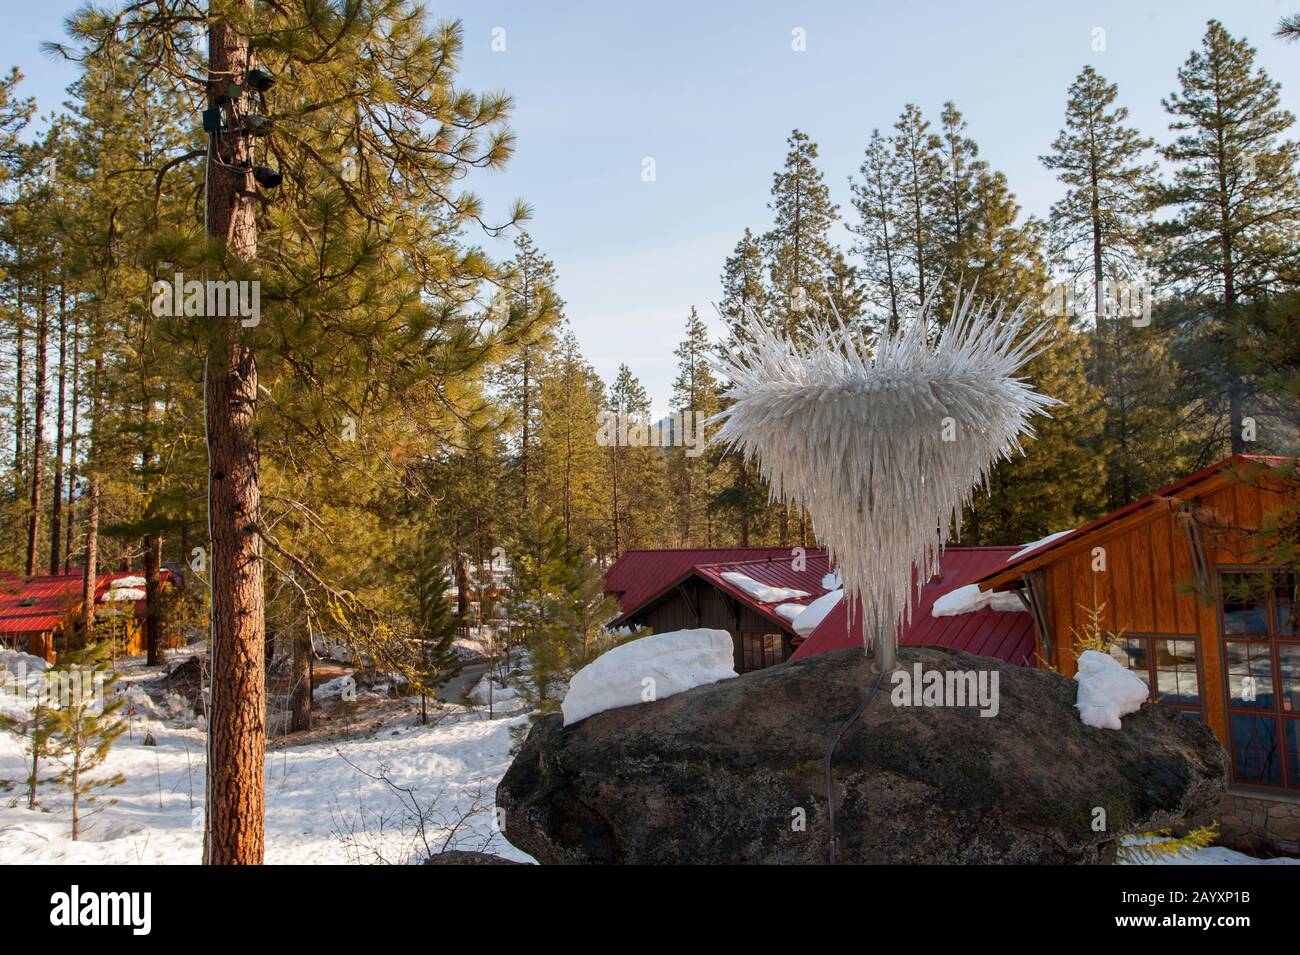 A Chihuly glass sculpture ‘Icicles’ at the Sleeping Lady Mountain Retreat in Leavenworth, Eastern Washington State, USA. Stock Photo